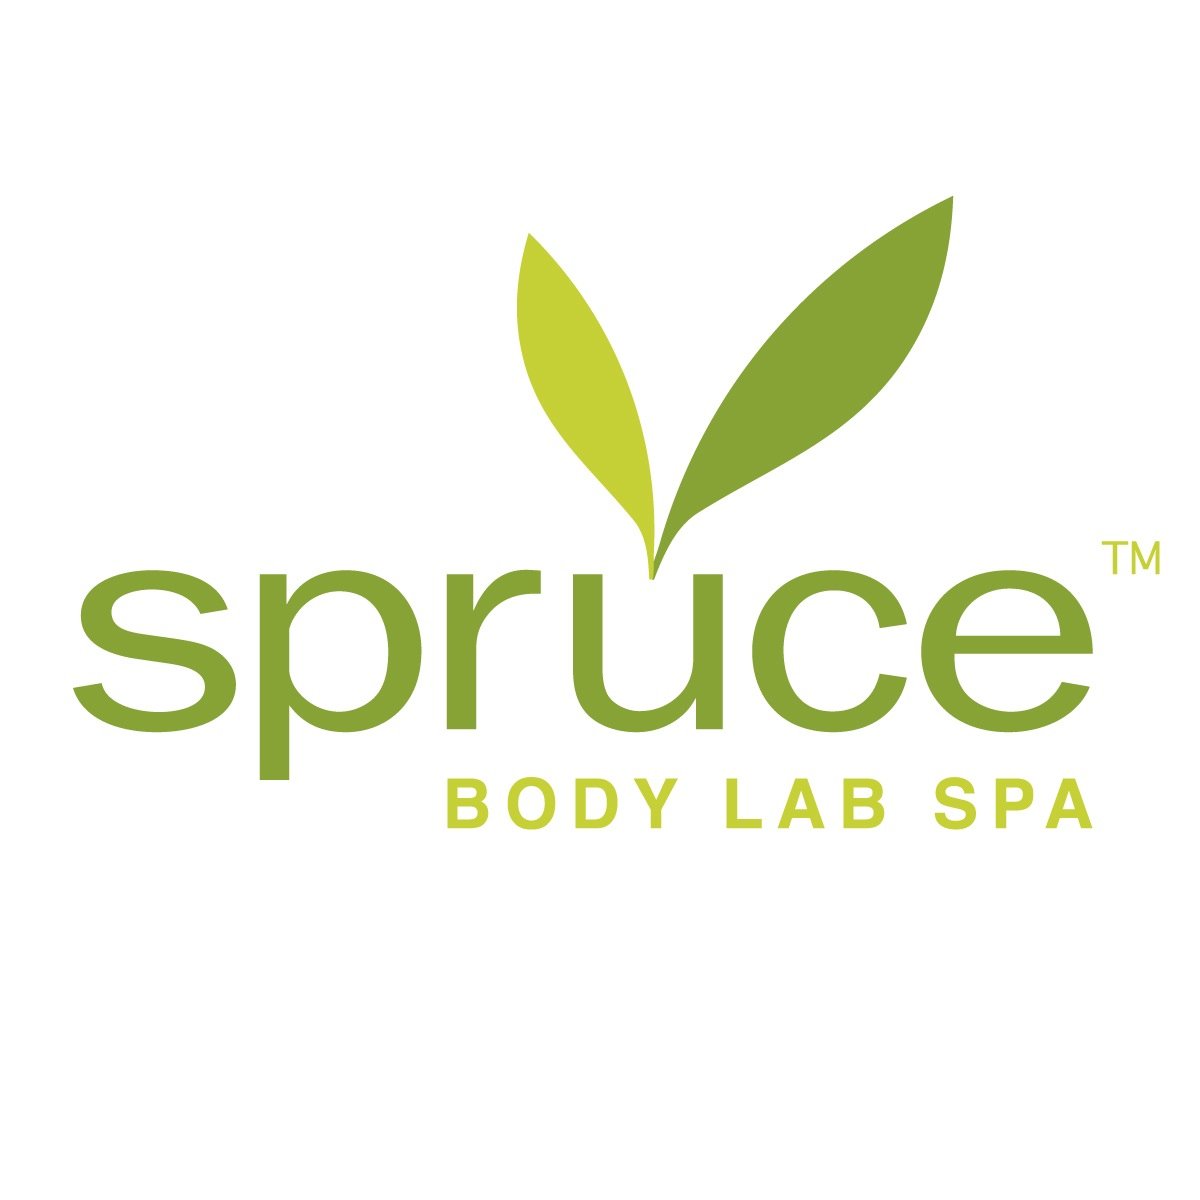 Spruce Body Lab Spa is committed to delivering the best services and personalized treatments in massage therapy, facials, skin care, infrared sauna and more.